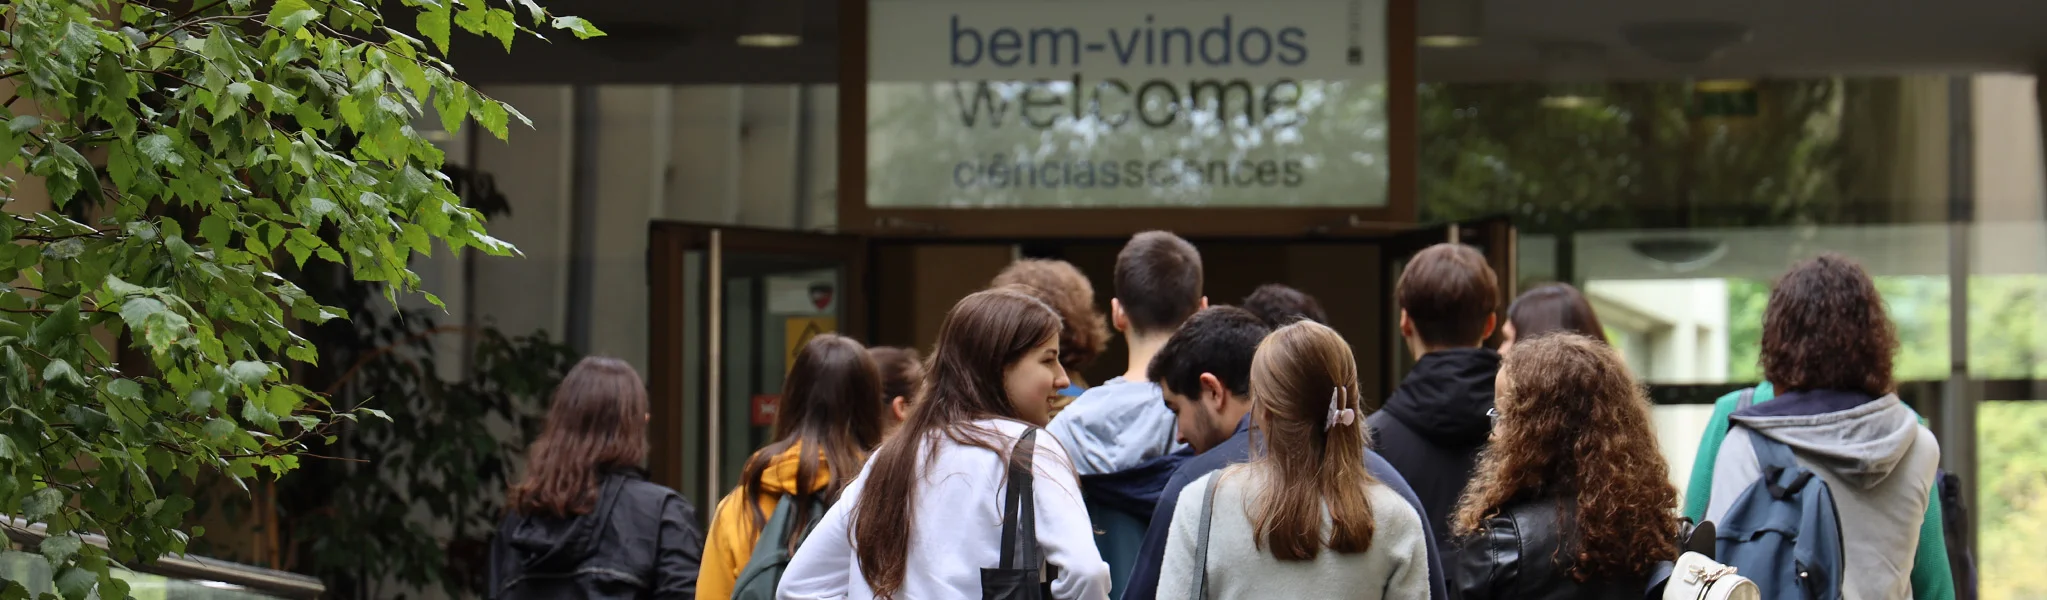 students enter the premises of the Faculty of Sciences of the University of Porto; above the door, a sign reads "bem-vindos. welcome"